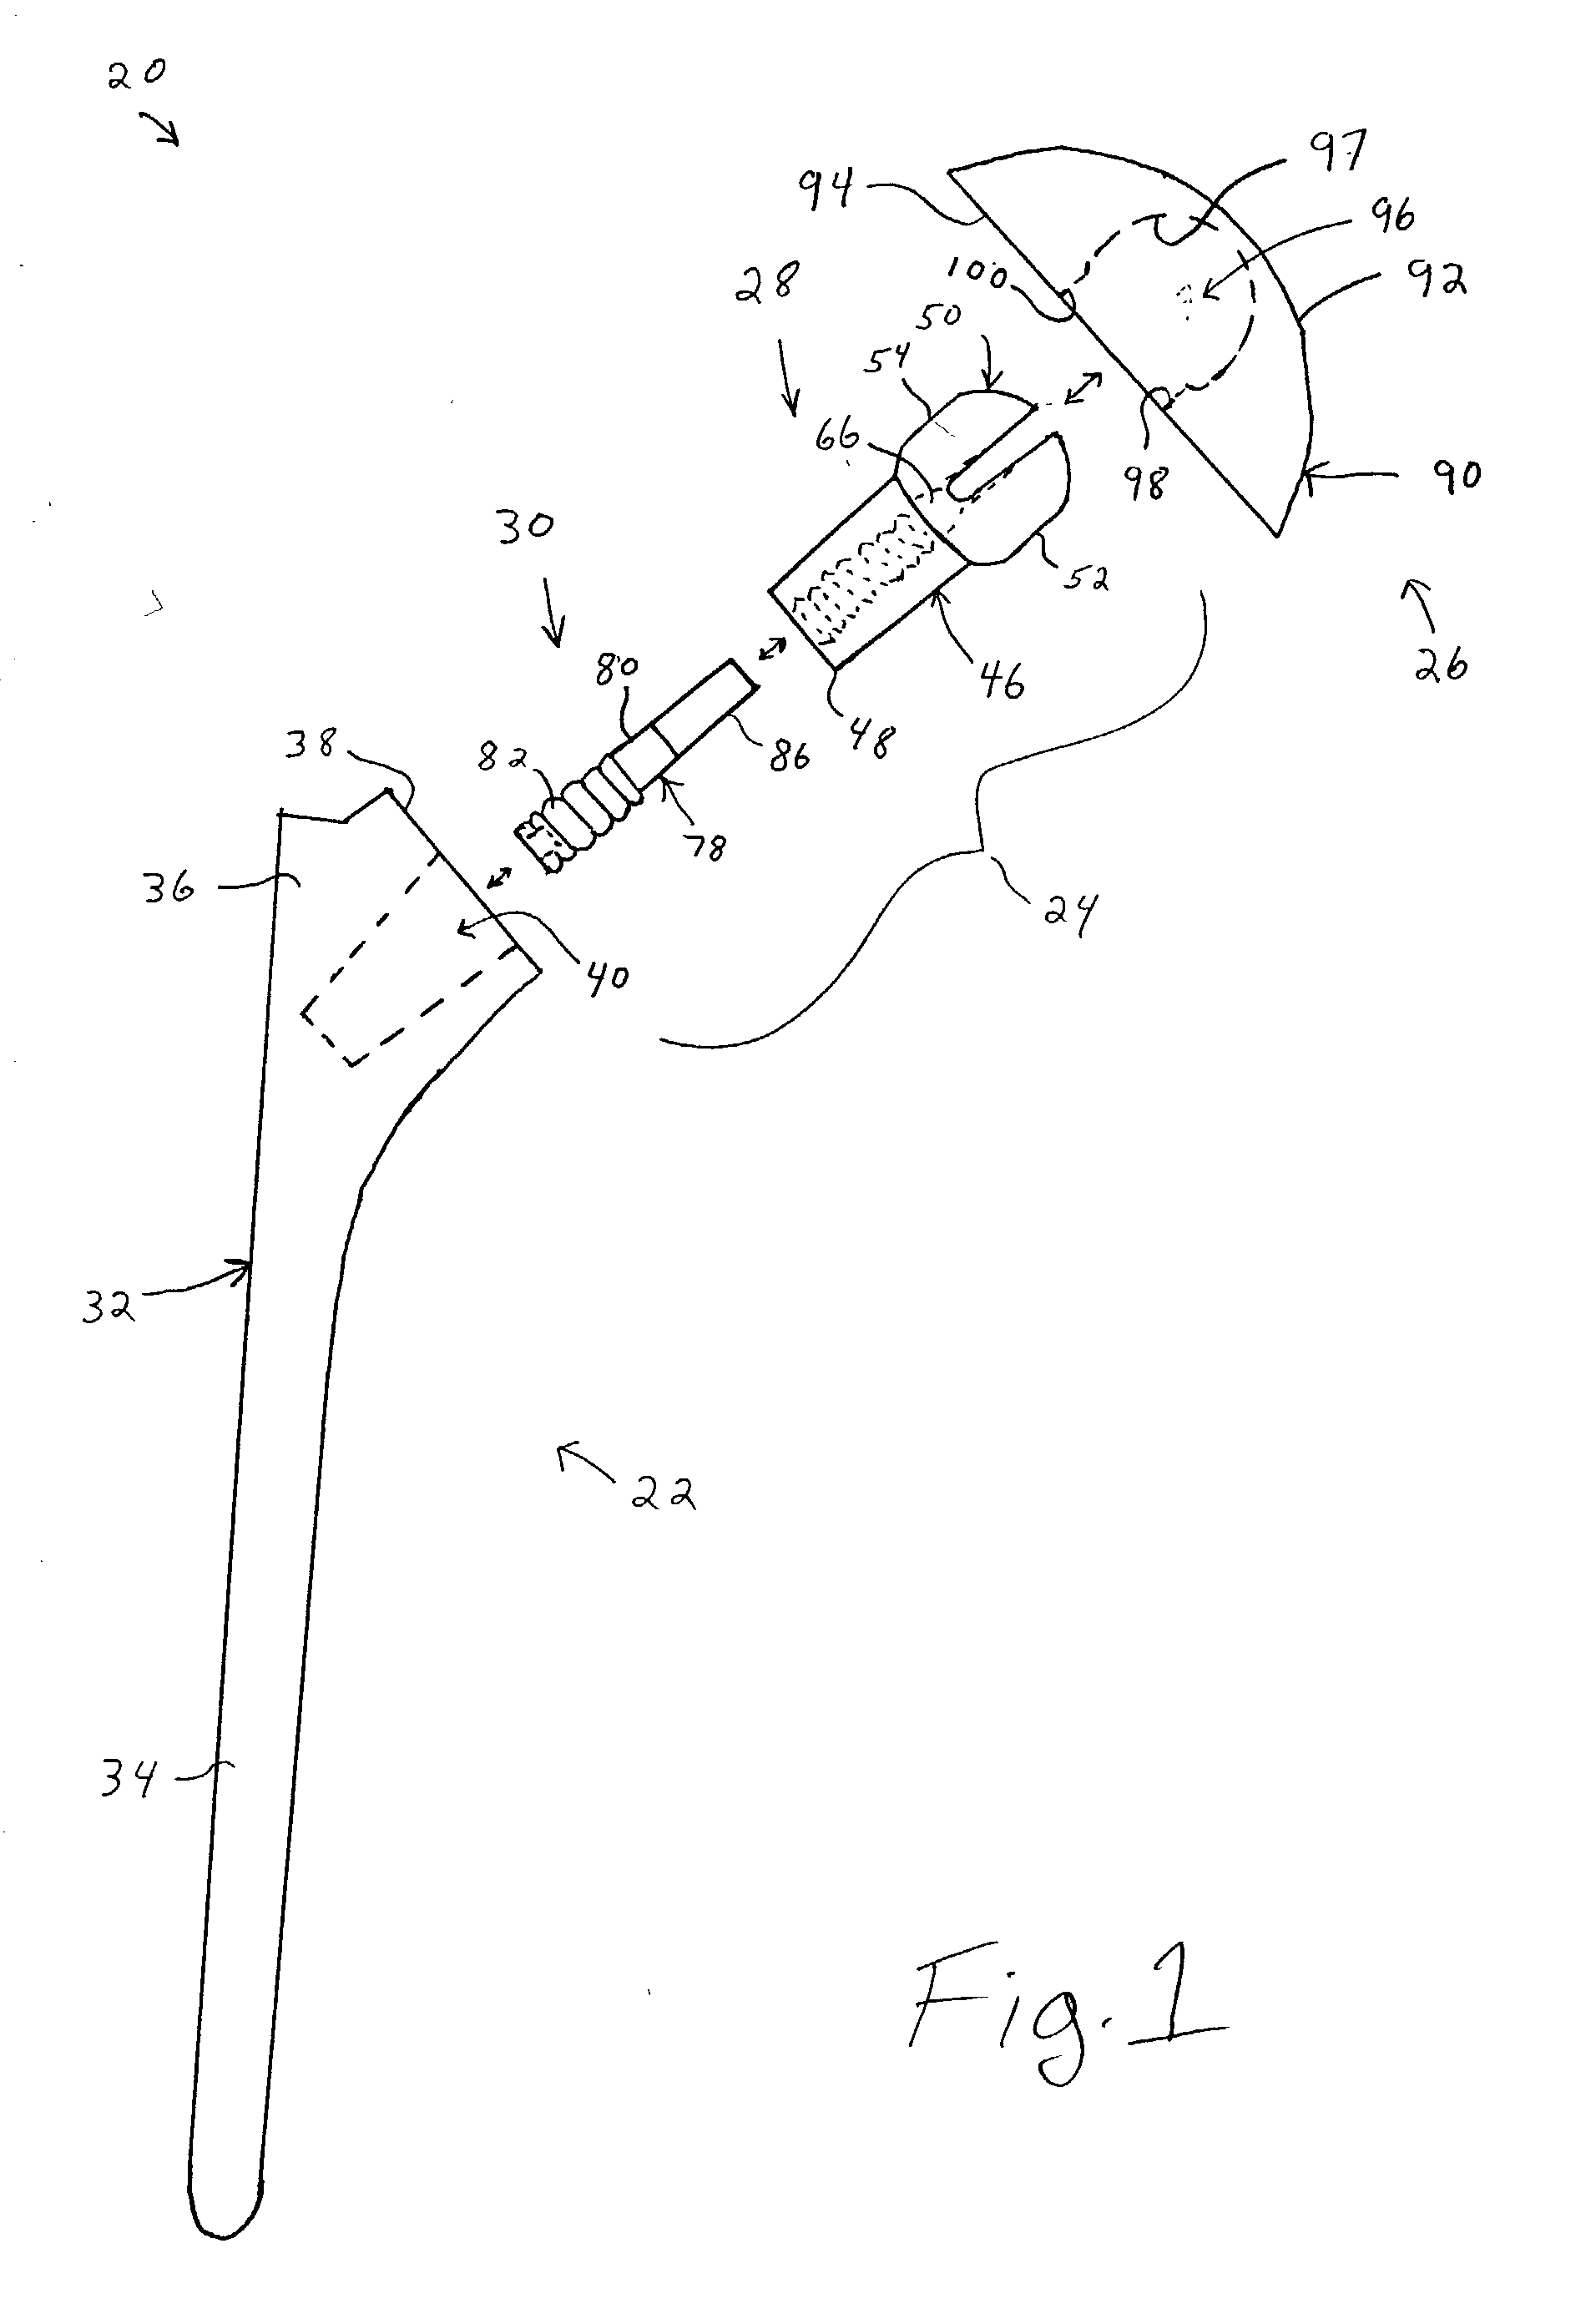 Shoulder prosthesis having a removable conjoining component coupling a humeral component and humeral head and providing infinitely adjustable positioning of an articular surface of the humeral head